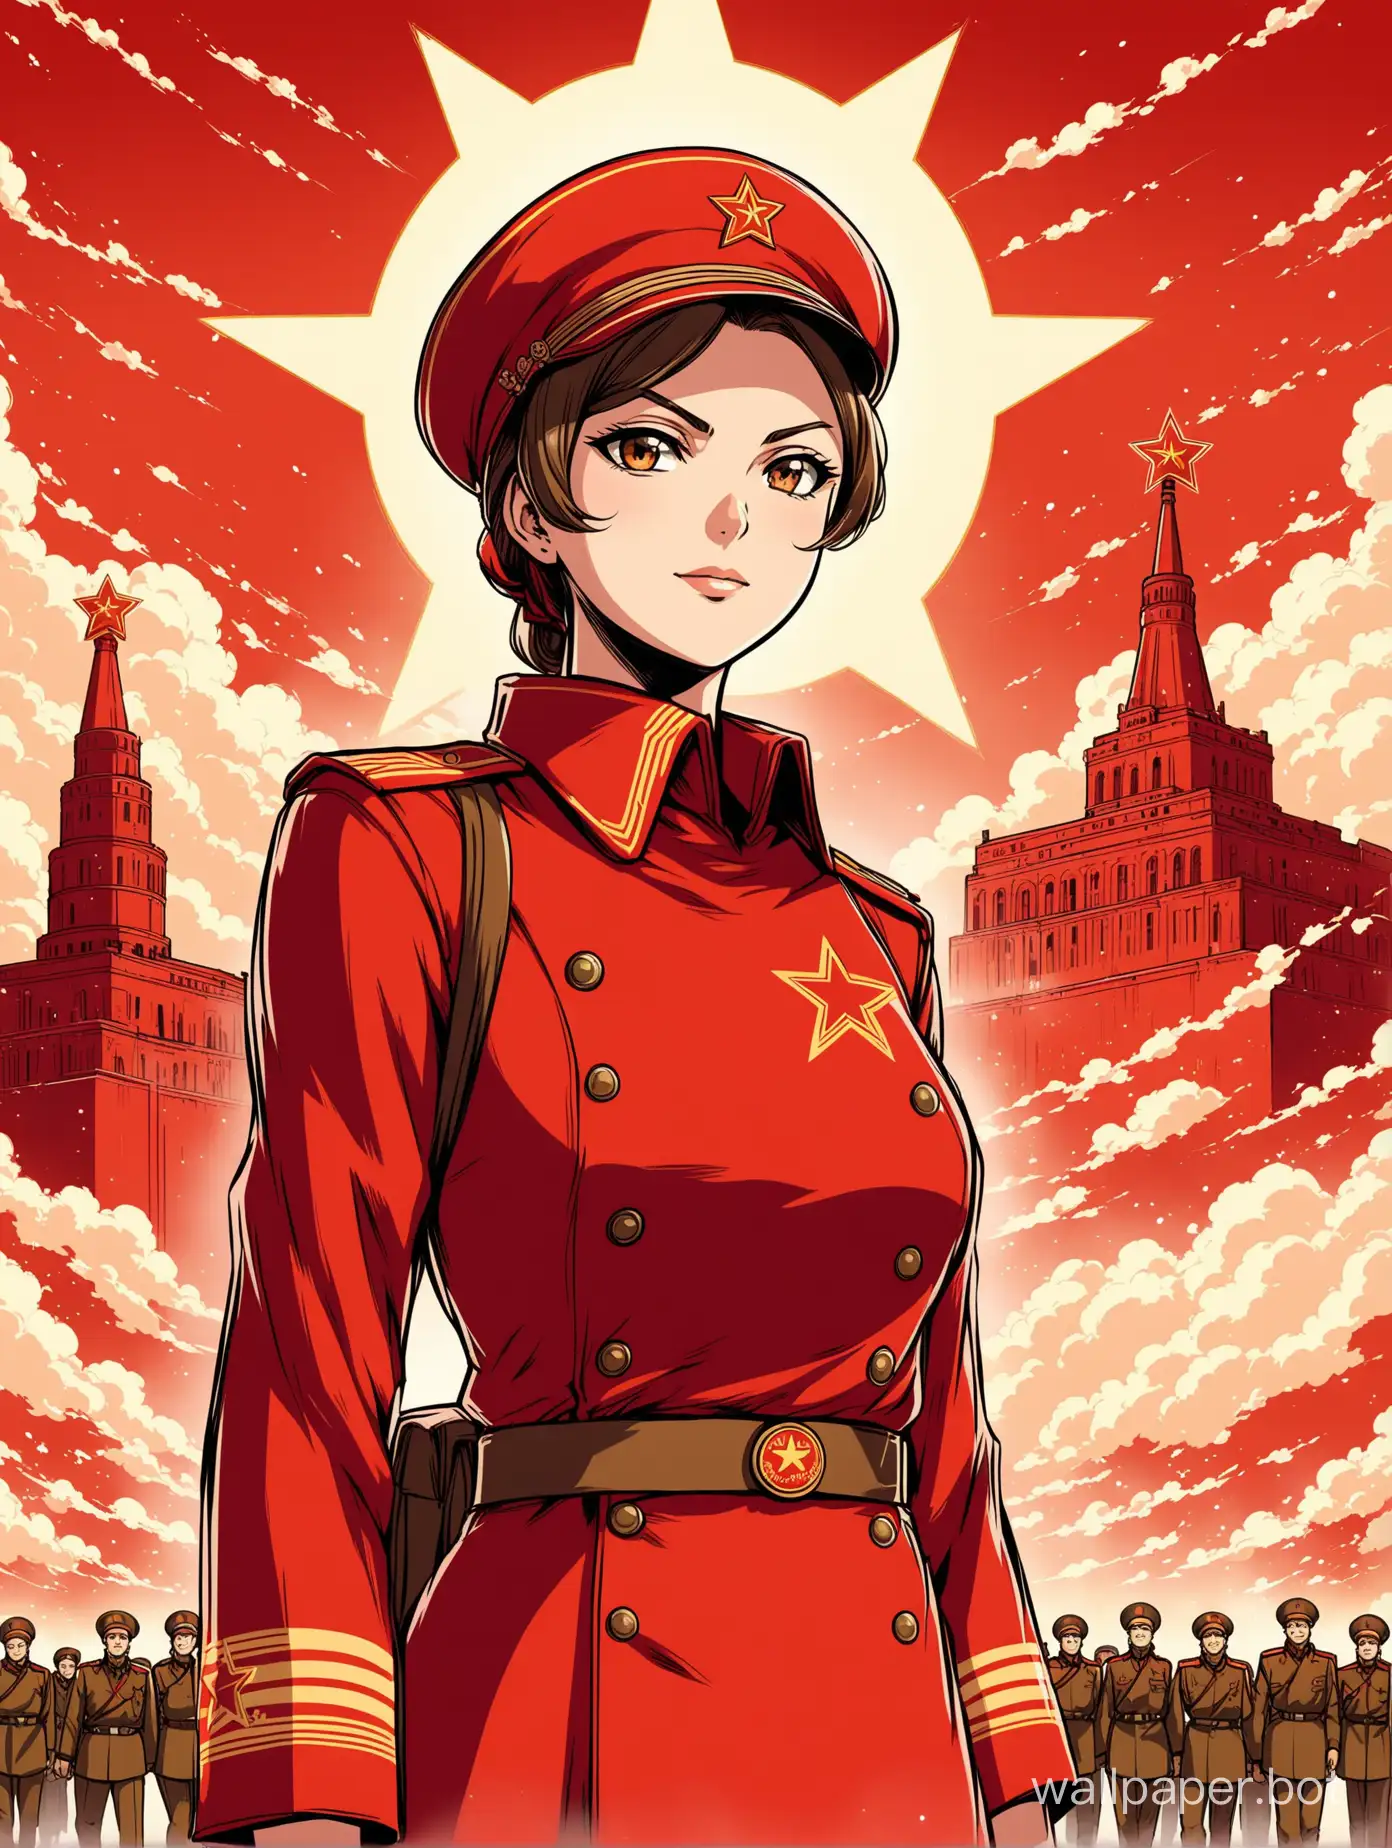 USSR in anime style